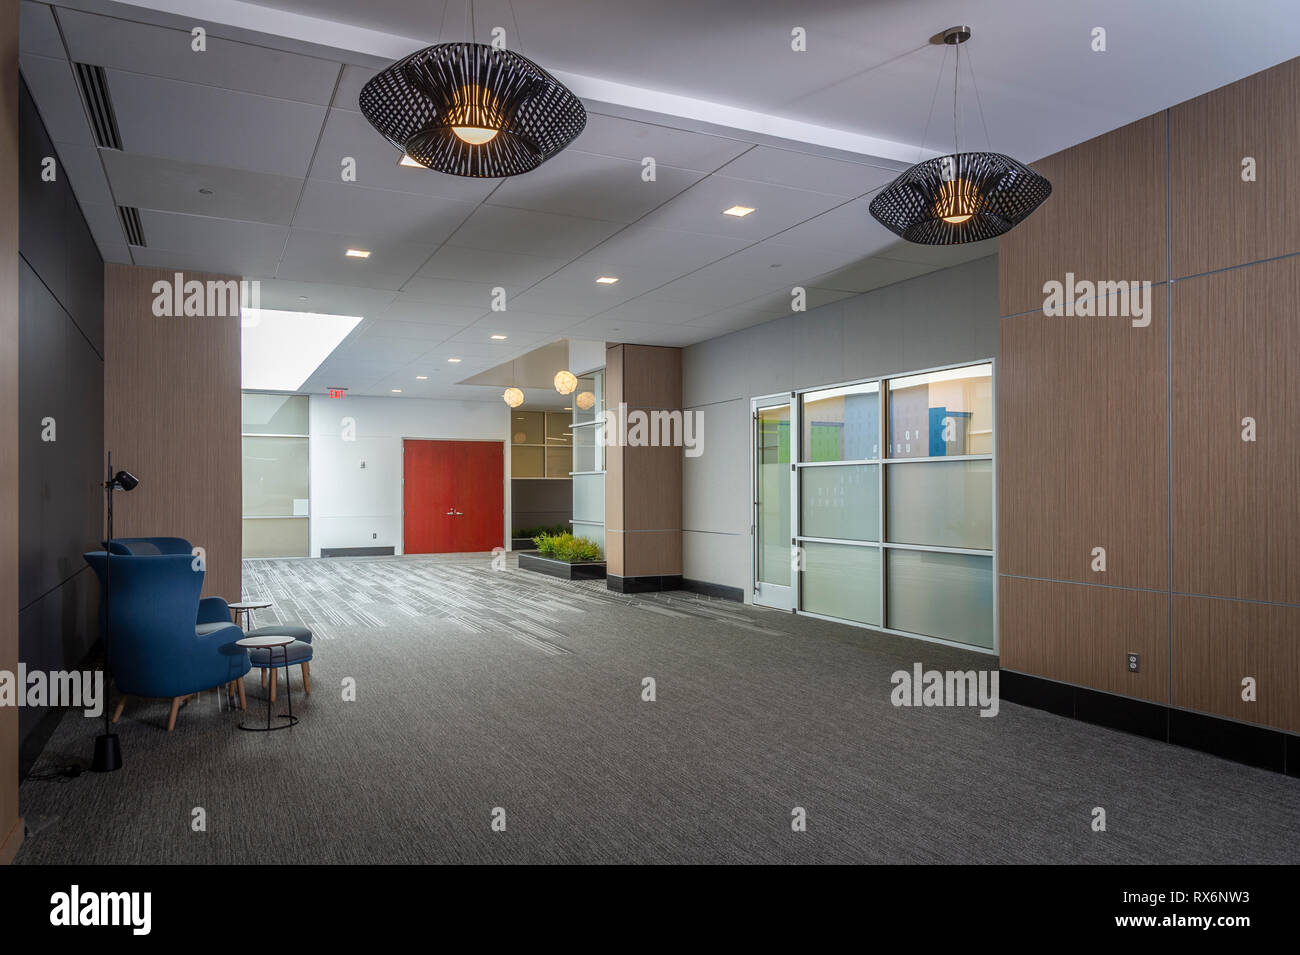 Large Modern Hallway In Commercial Office Building Stock Photo